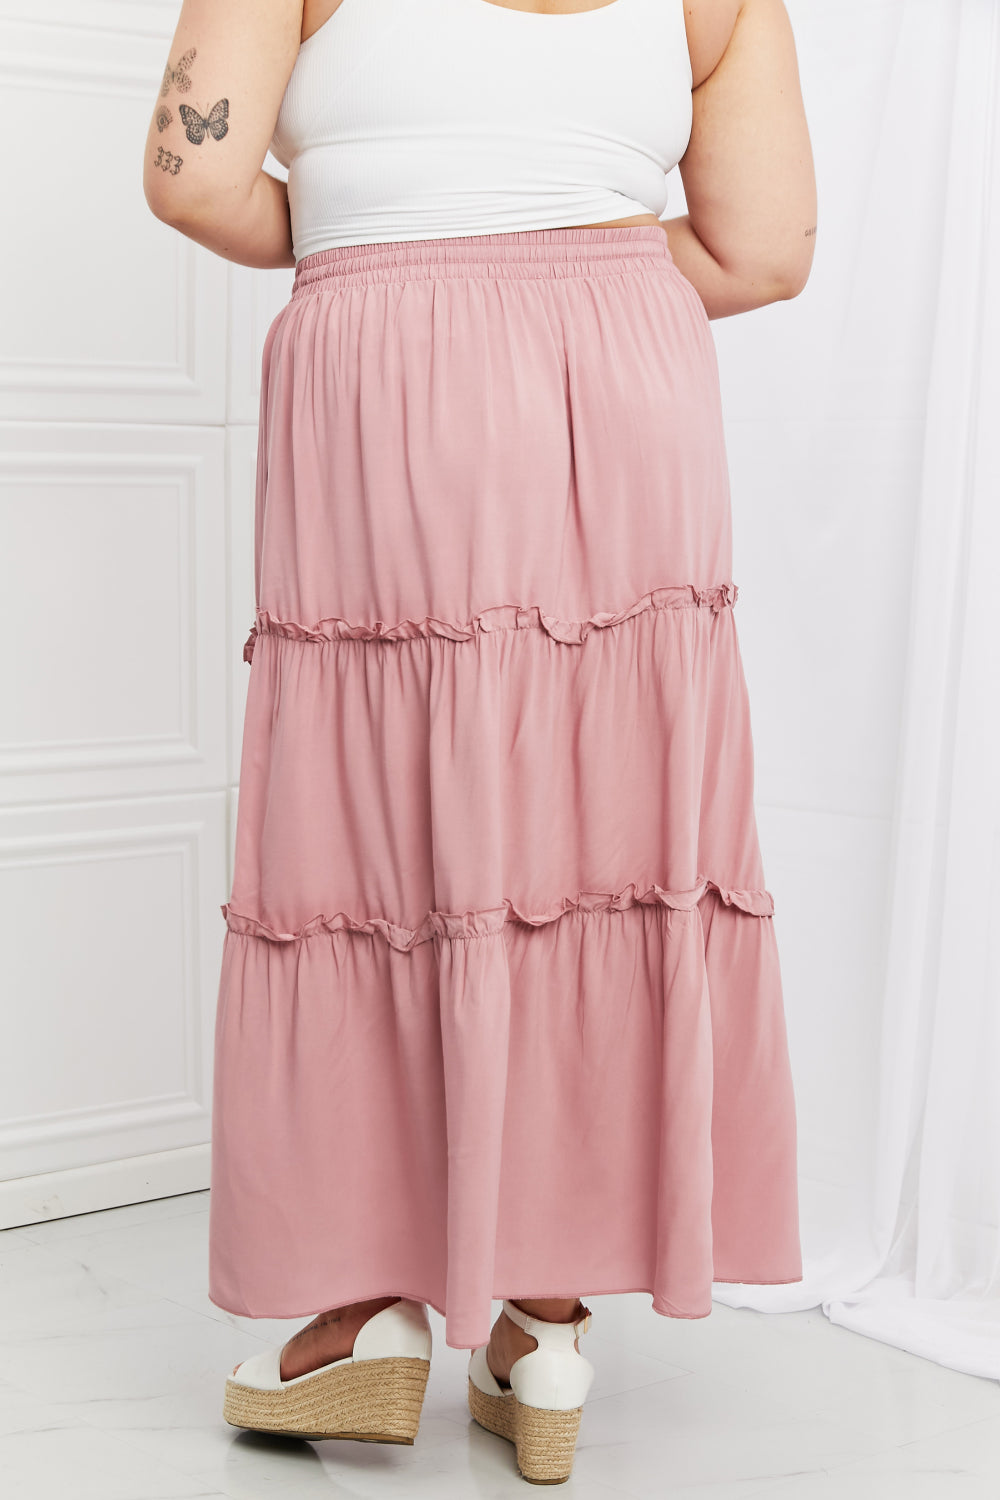 Summer Days Ruffled Maxi Skirt in Mauve  Southern Soul Collectives 